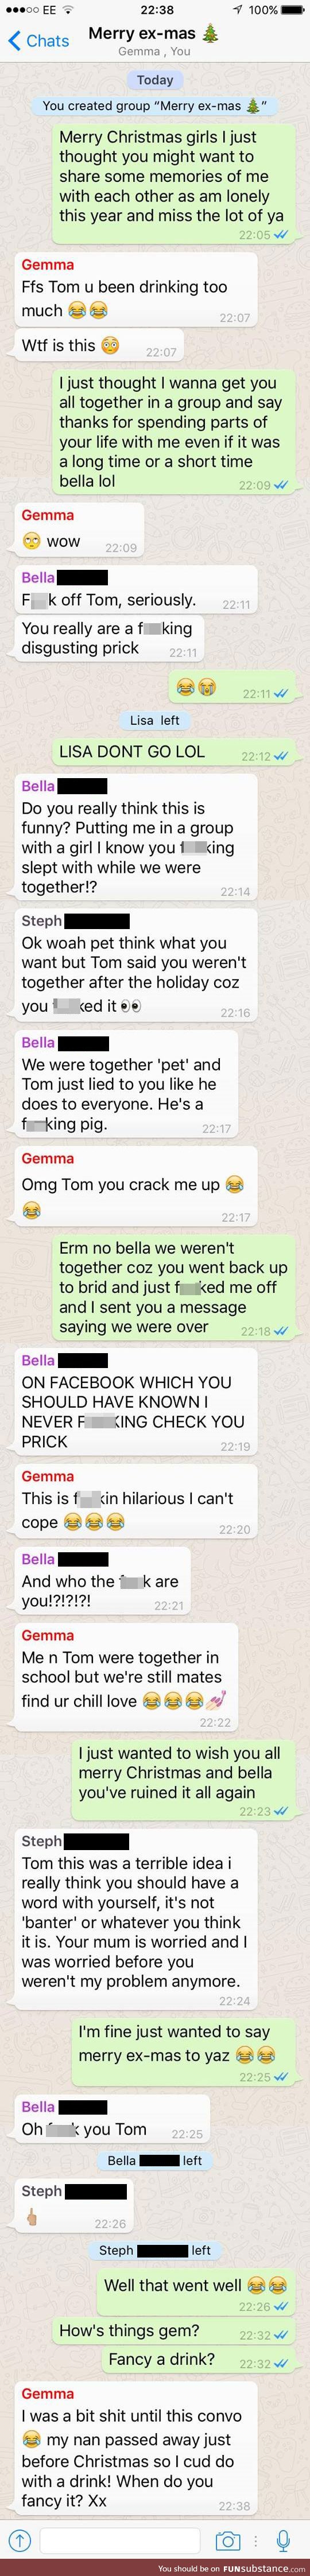 Guy group texts all his ex-girlfriends on Christmas